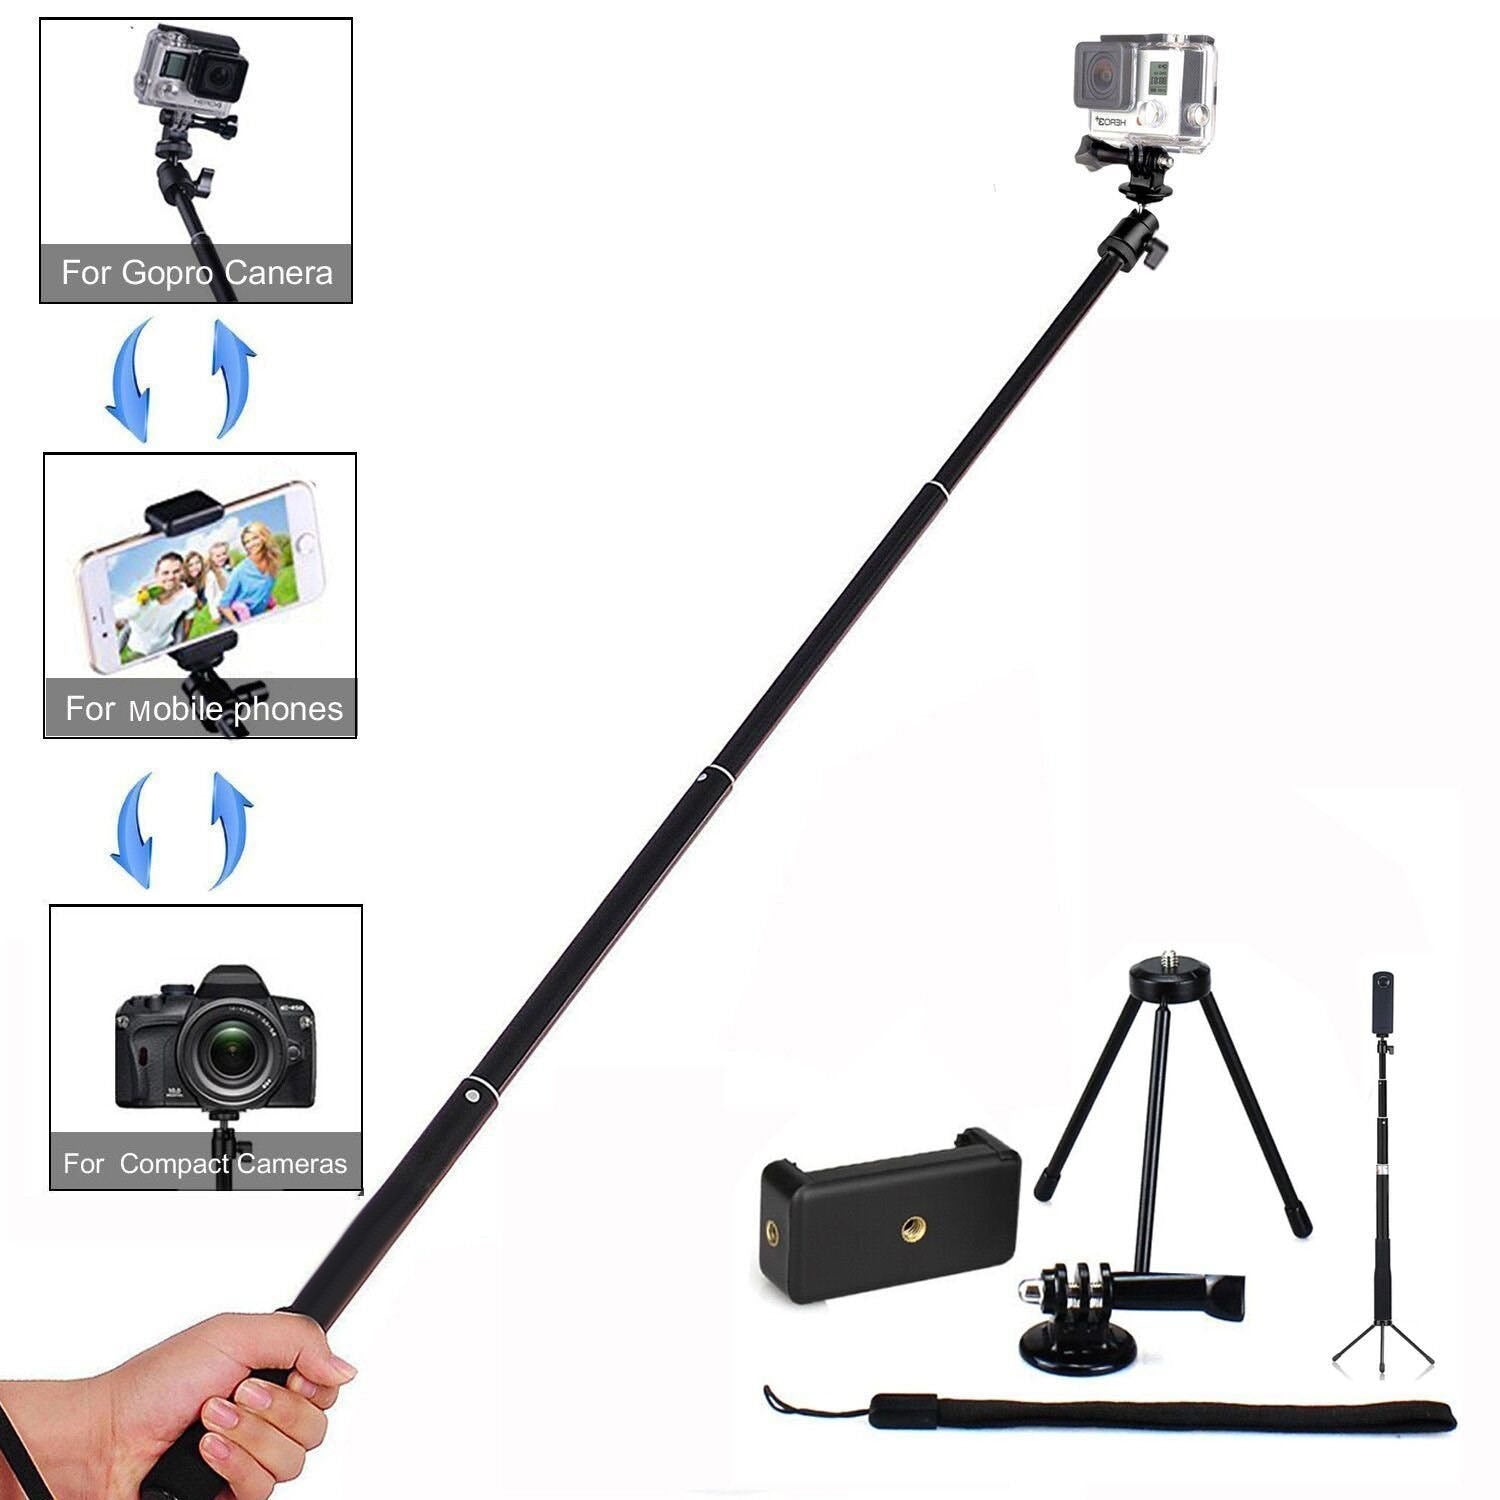 LDX-801 Extendable Hand Grip Monopod Adjustable Pole Handle for Action Camera